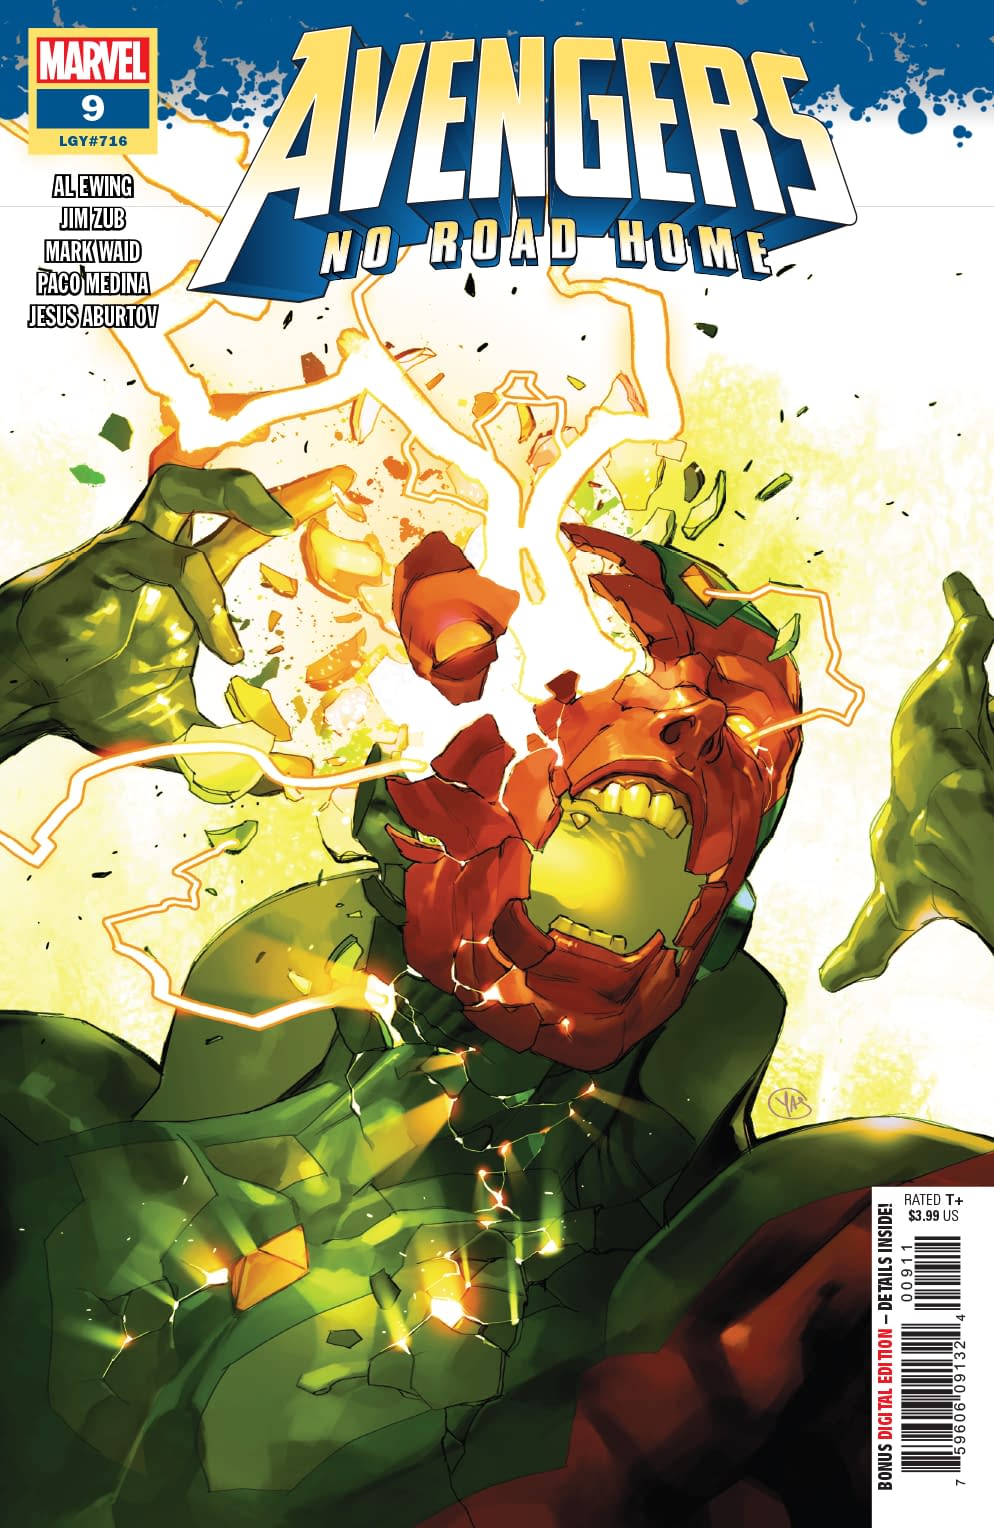 The Fate of the Universe in the Hands of Gomi and Bill the Lobster in Avengers No Road Home #9